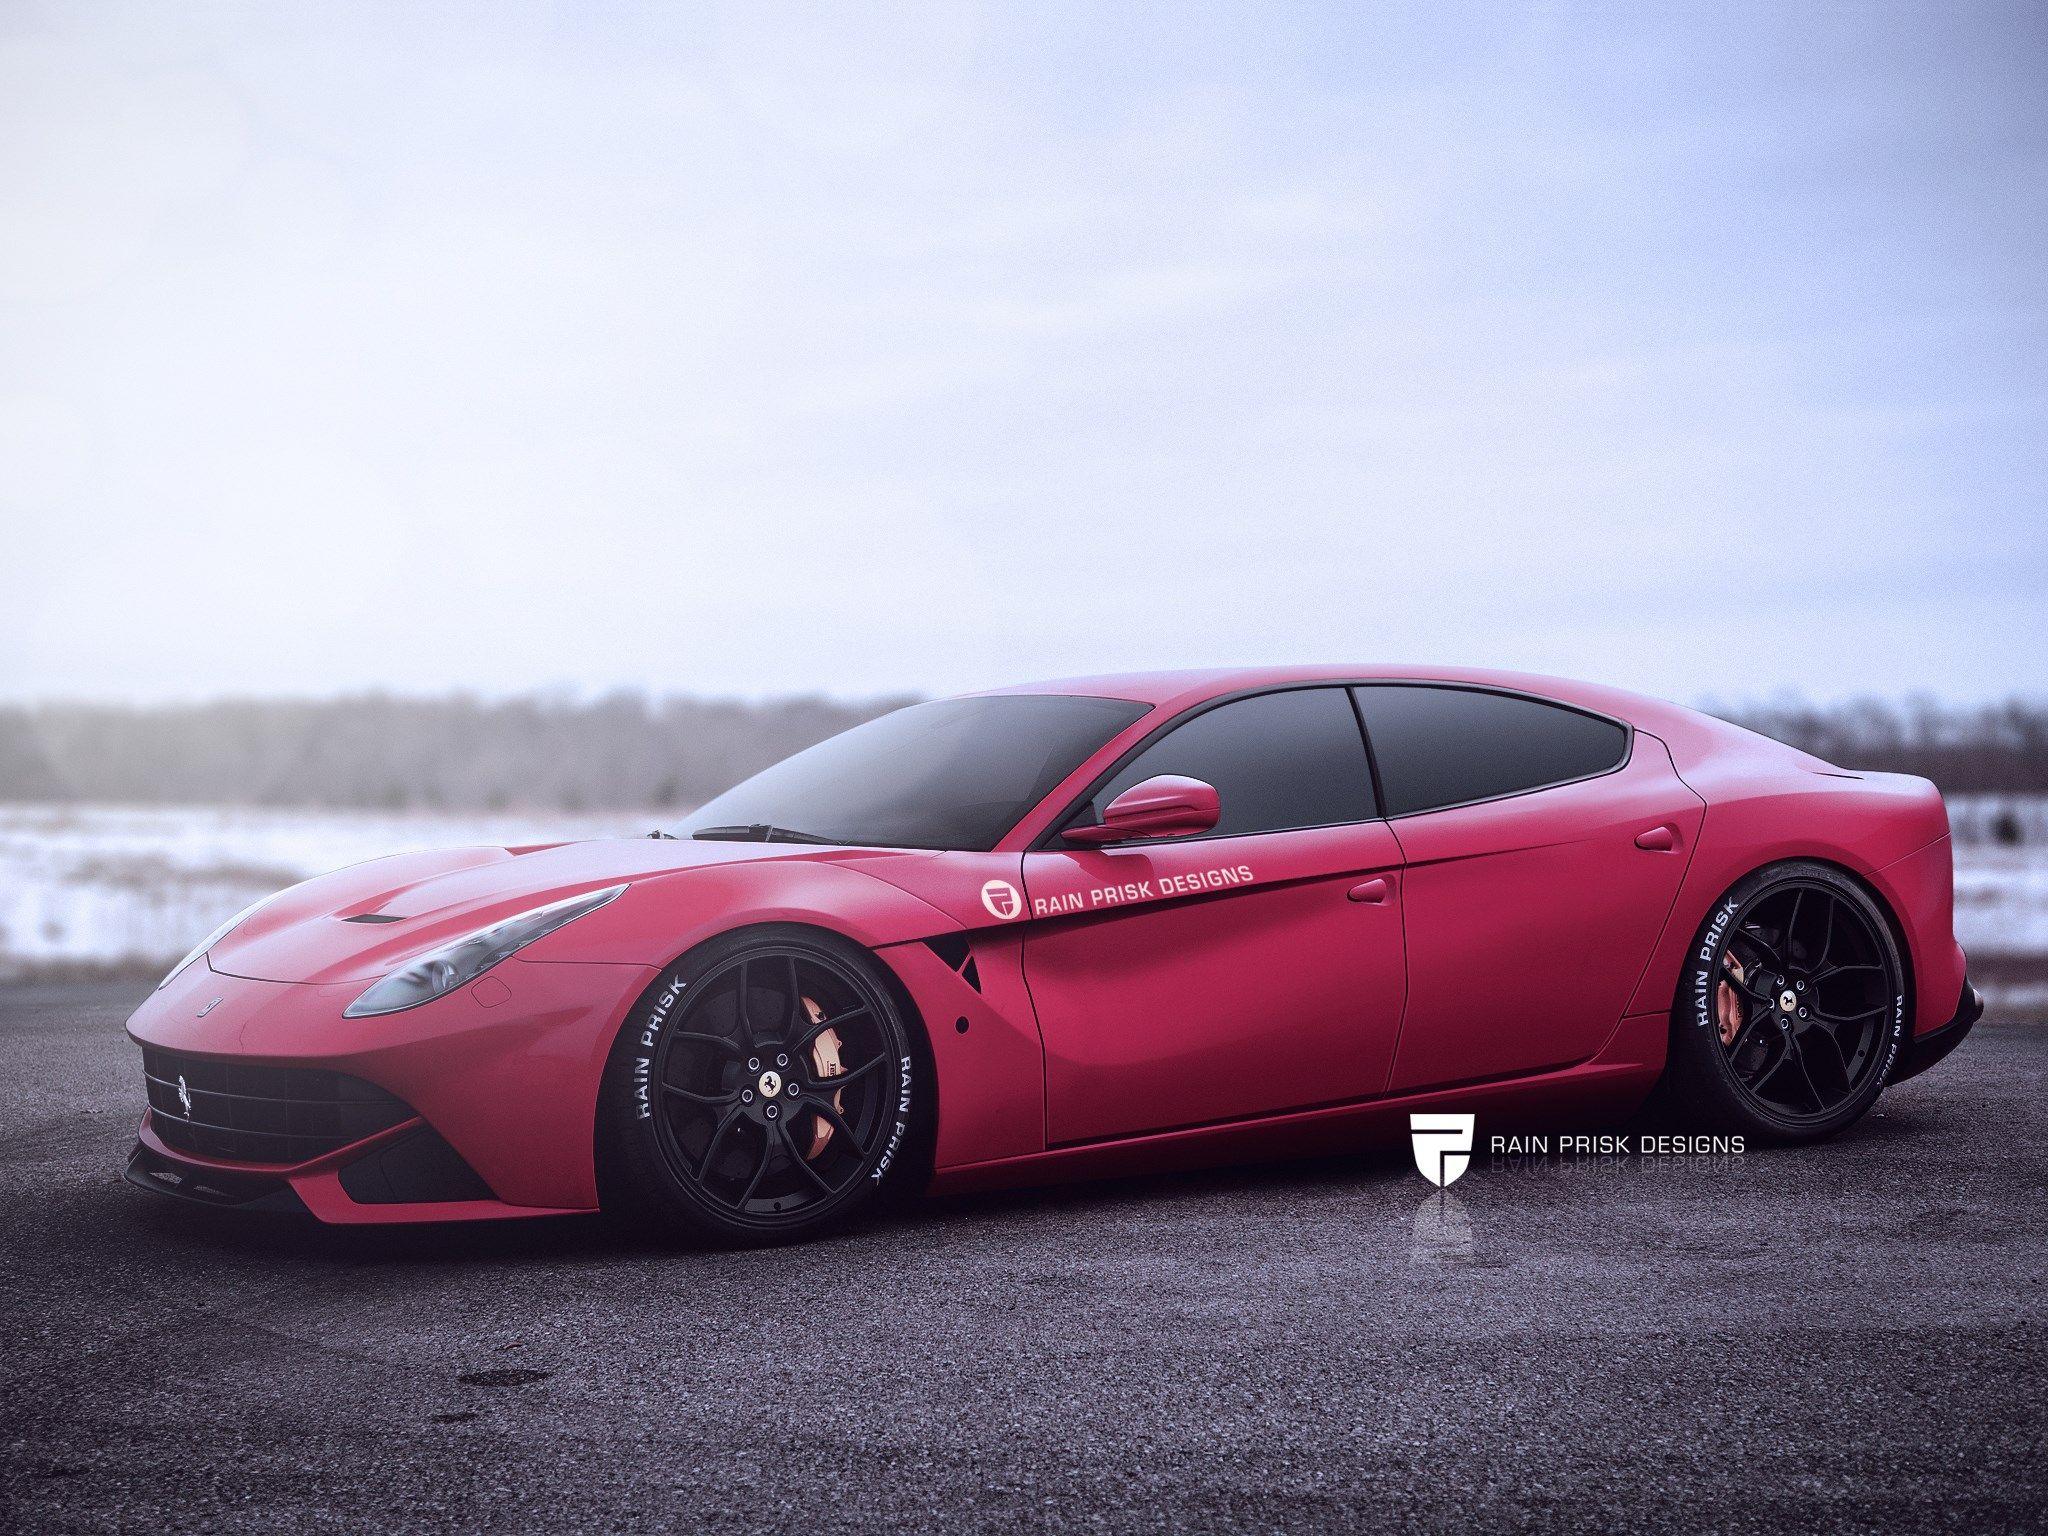 Four Door Ferrari F12 Rendering Is Ready To One Up The GTC4Lusso